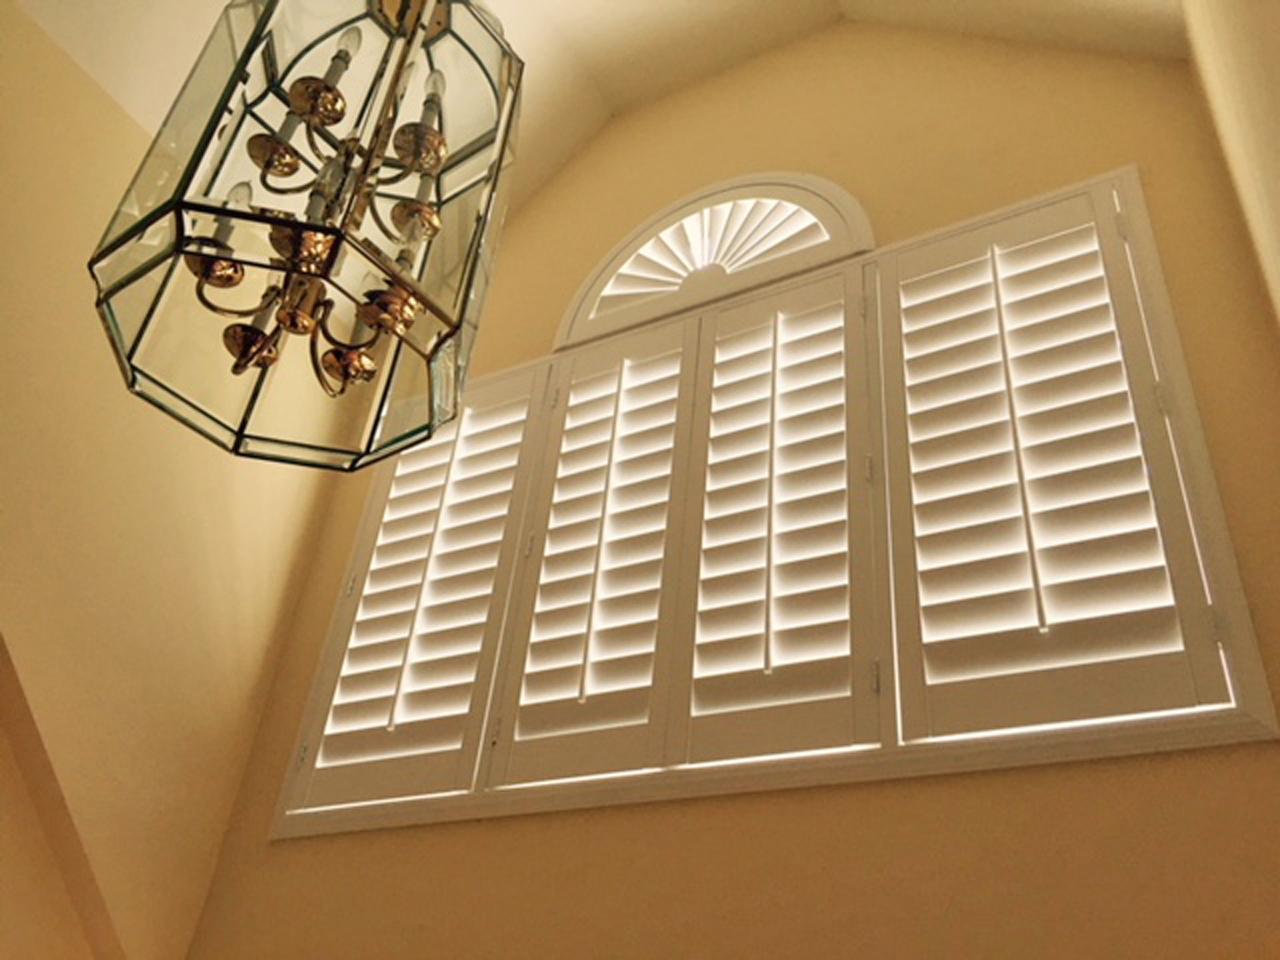 Sunburst and shutters in a two story foyer